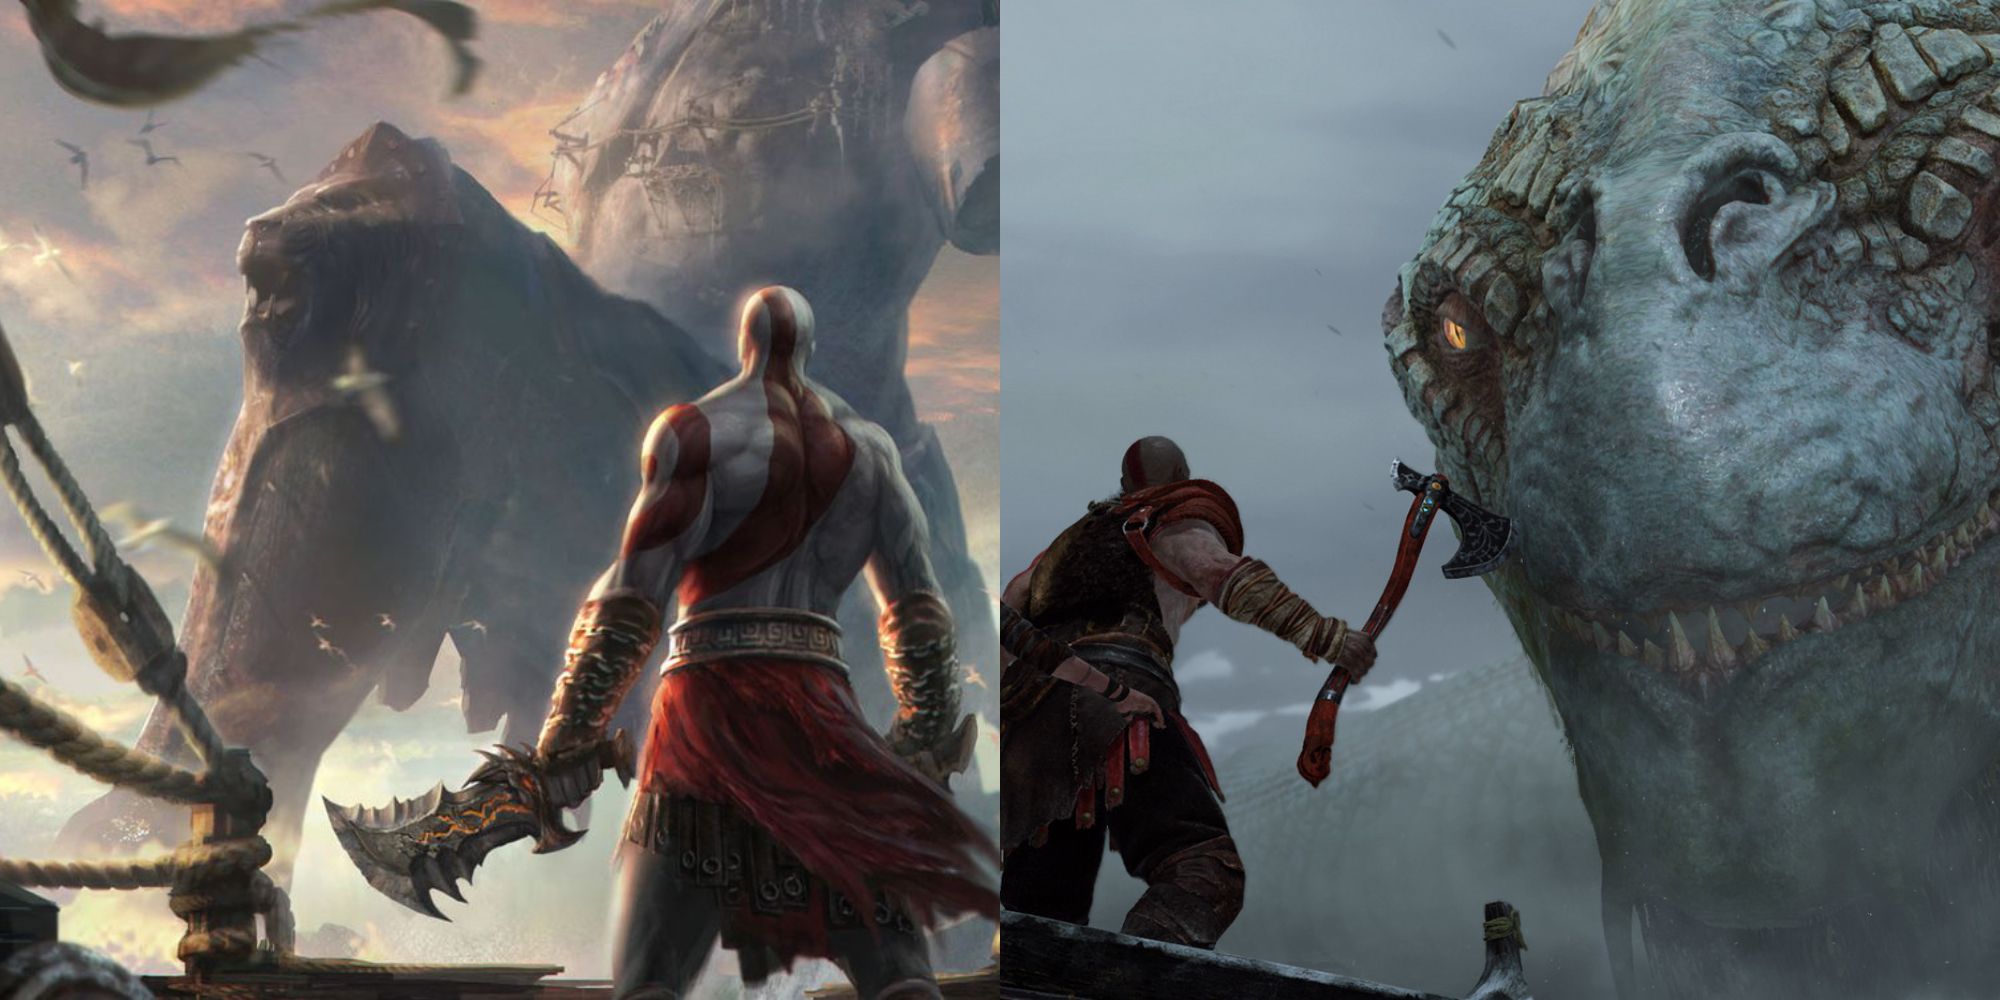 Kratos WILL RETURN TO GREECE For the BLADE OF OLYMPUS and End Norse  Mythology in GOD OF WAR RAGNAROK 